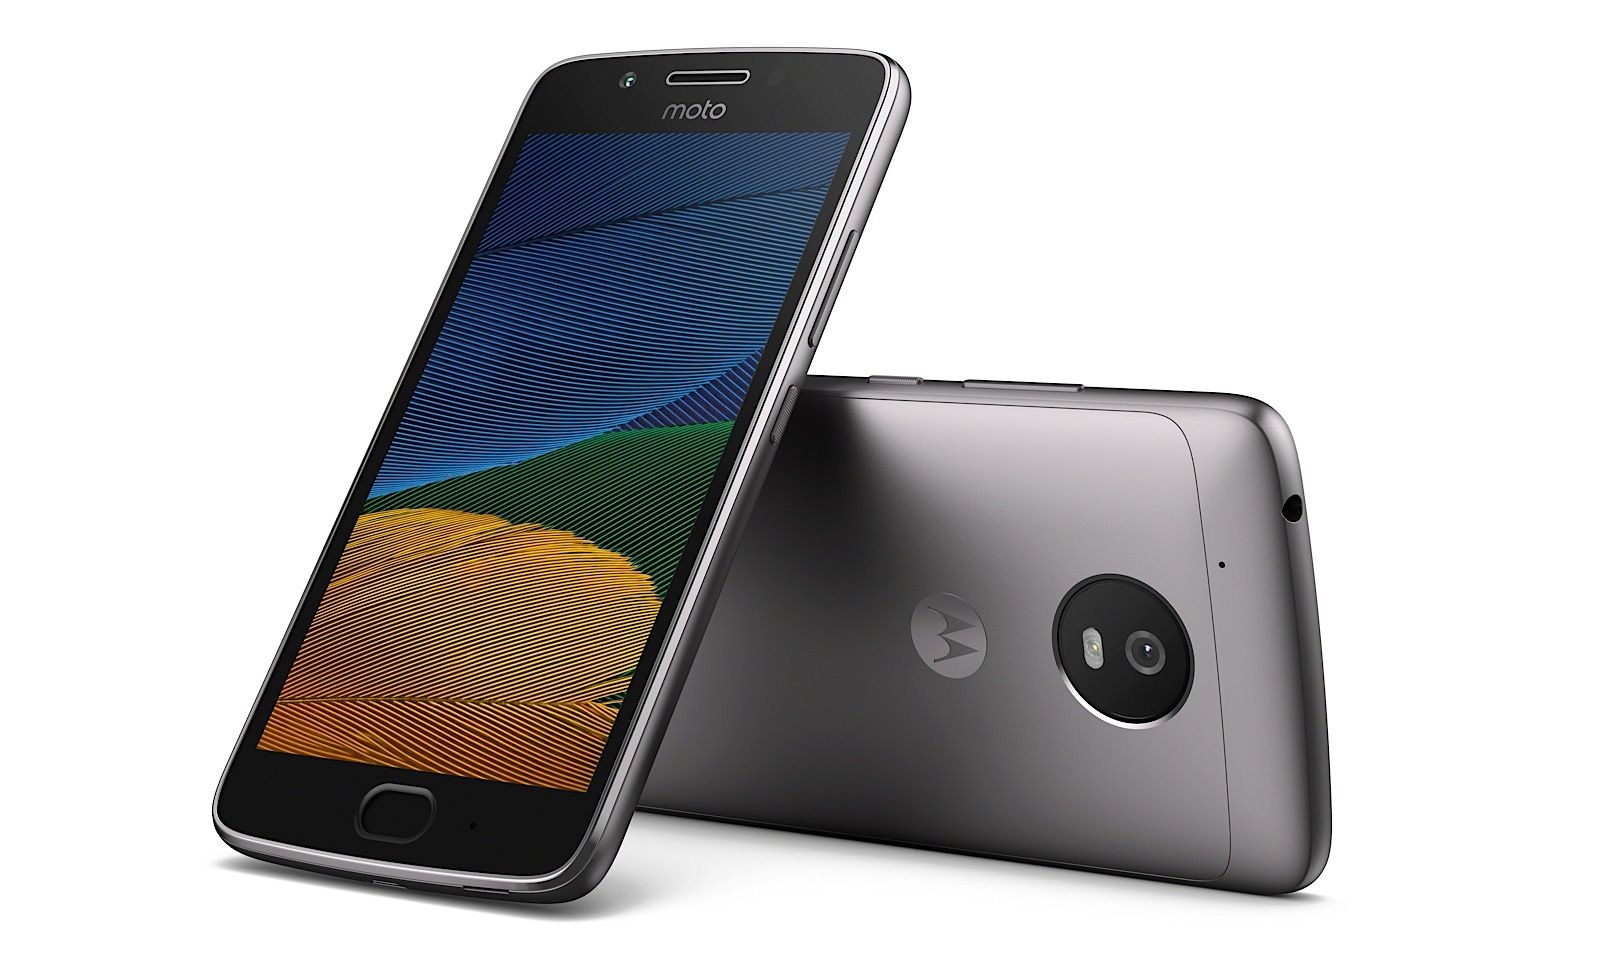 motorola moto g5 and g5 plus arrive to retain the budget smartphone crown image 1